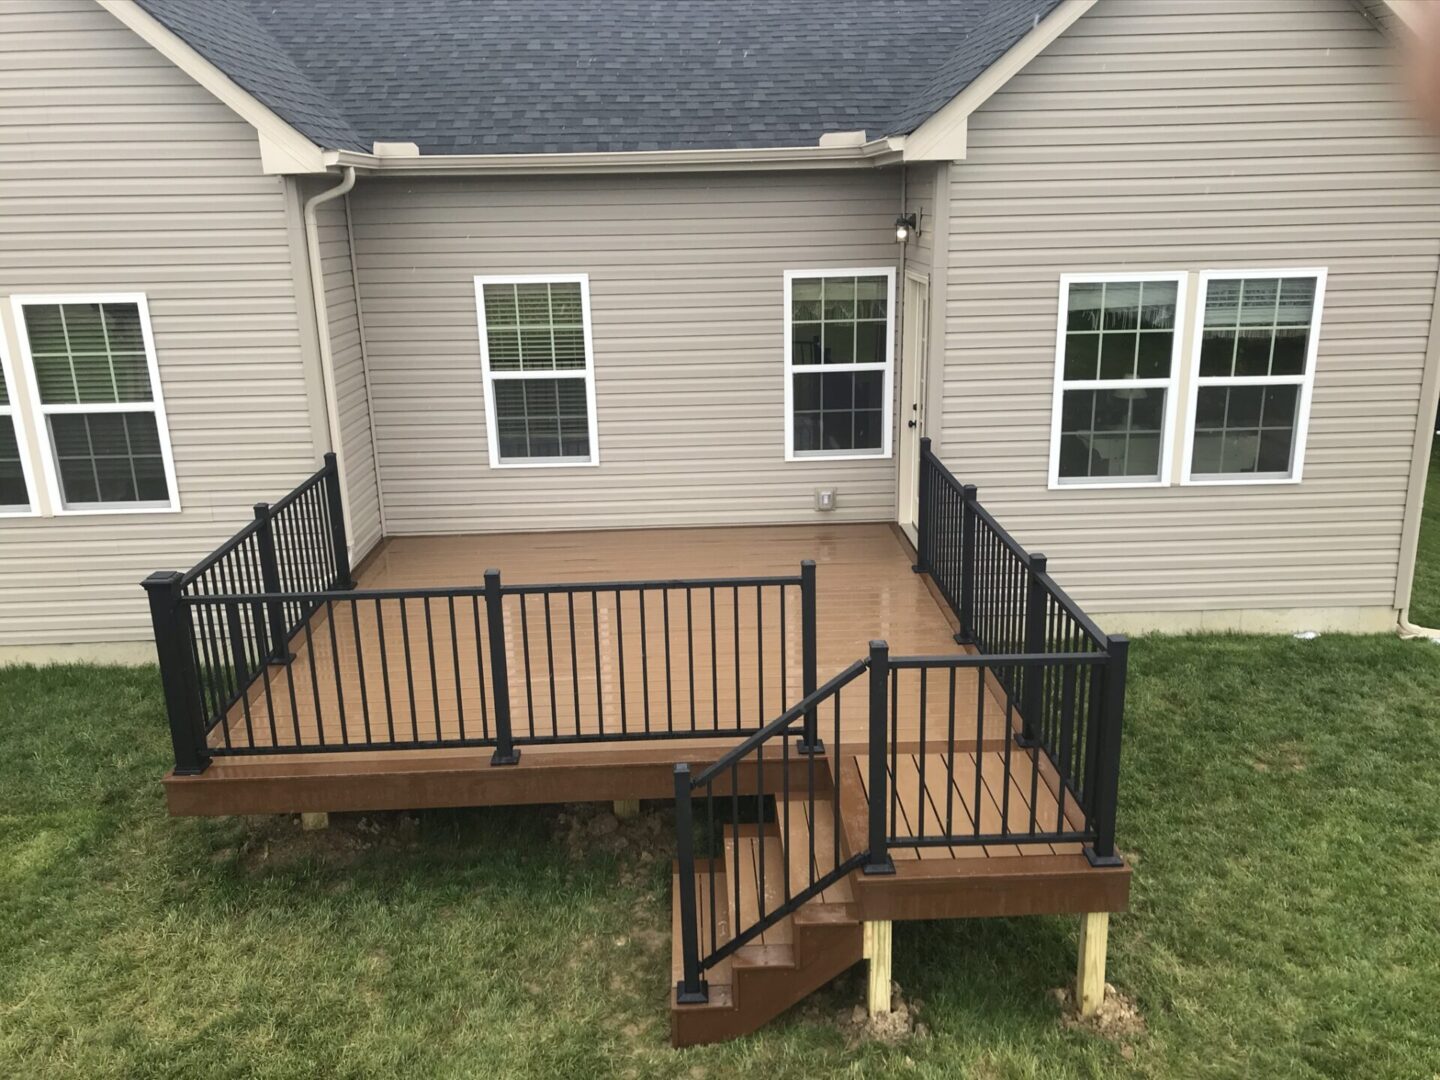 A deck with stairs and railing in the middle of a yard.